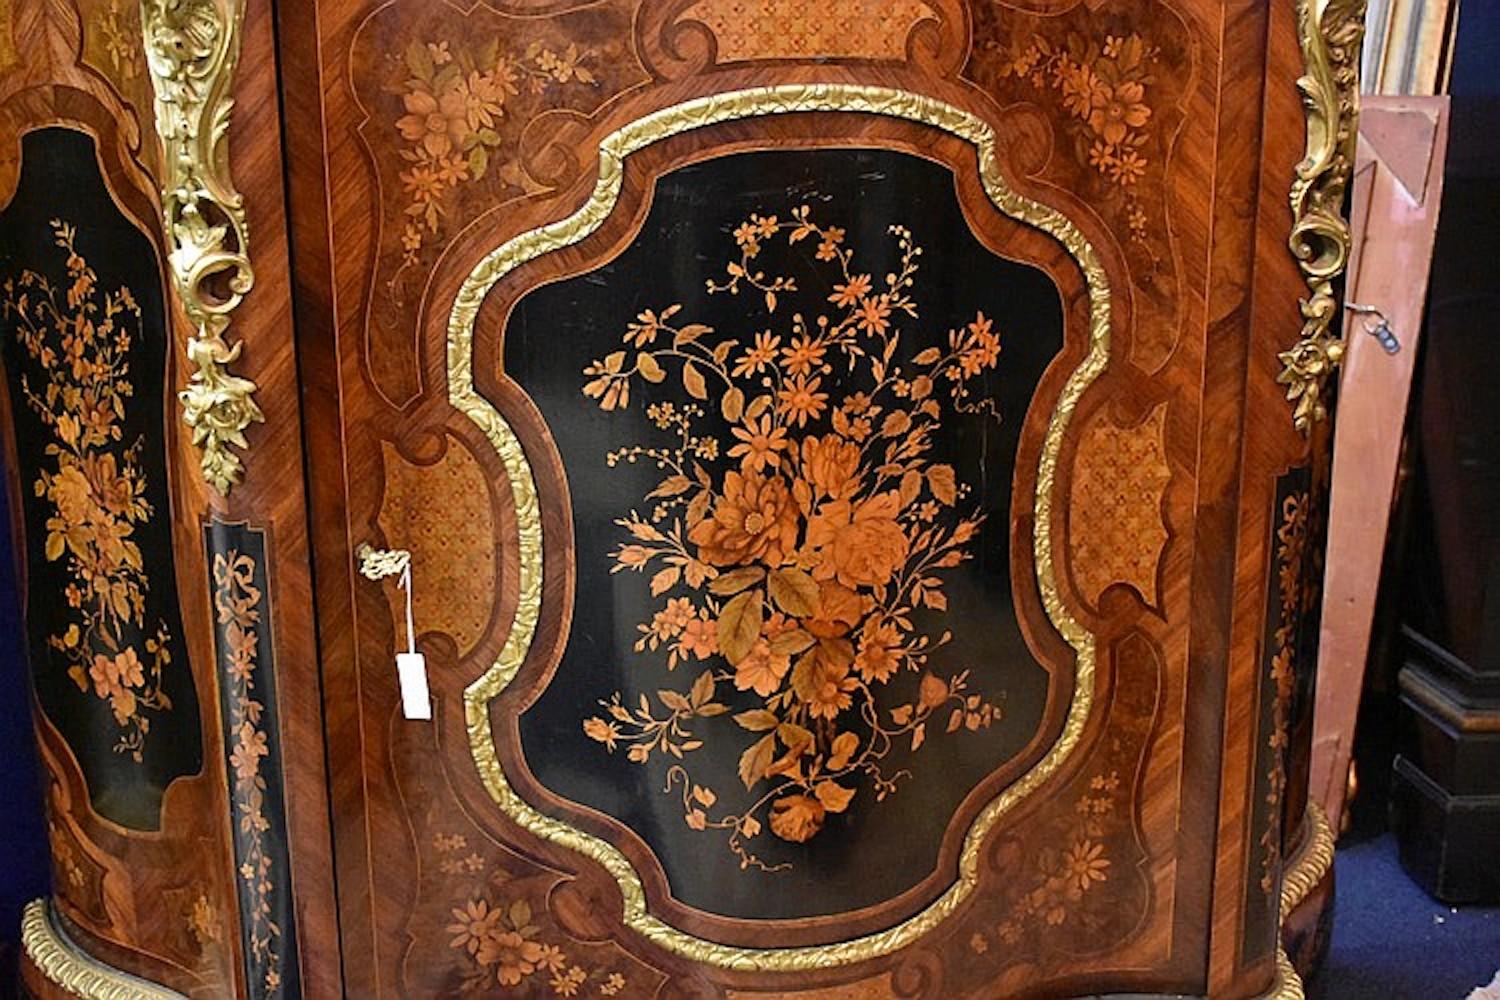 An exceptional quality French 19th century serpentine shaped kingwood salon cabinet having finely detailed floral marquetry inlay and ormolu mounts. Measures: Height 109 cm, width 108 cm.